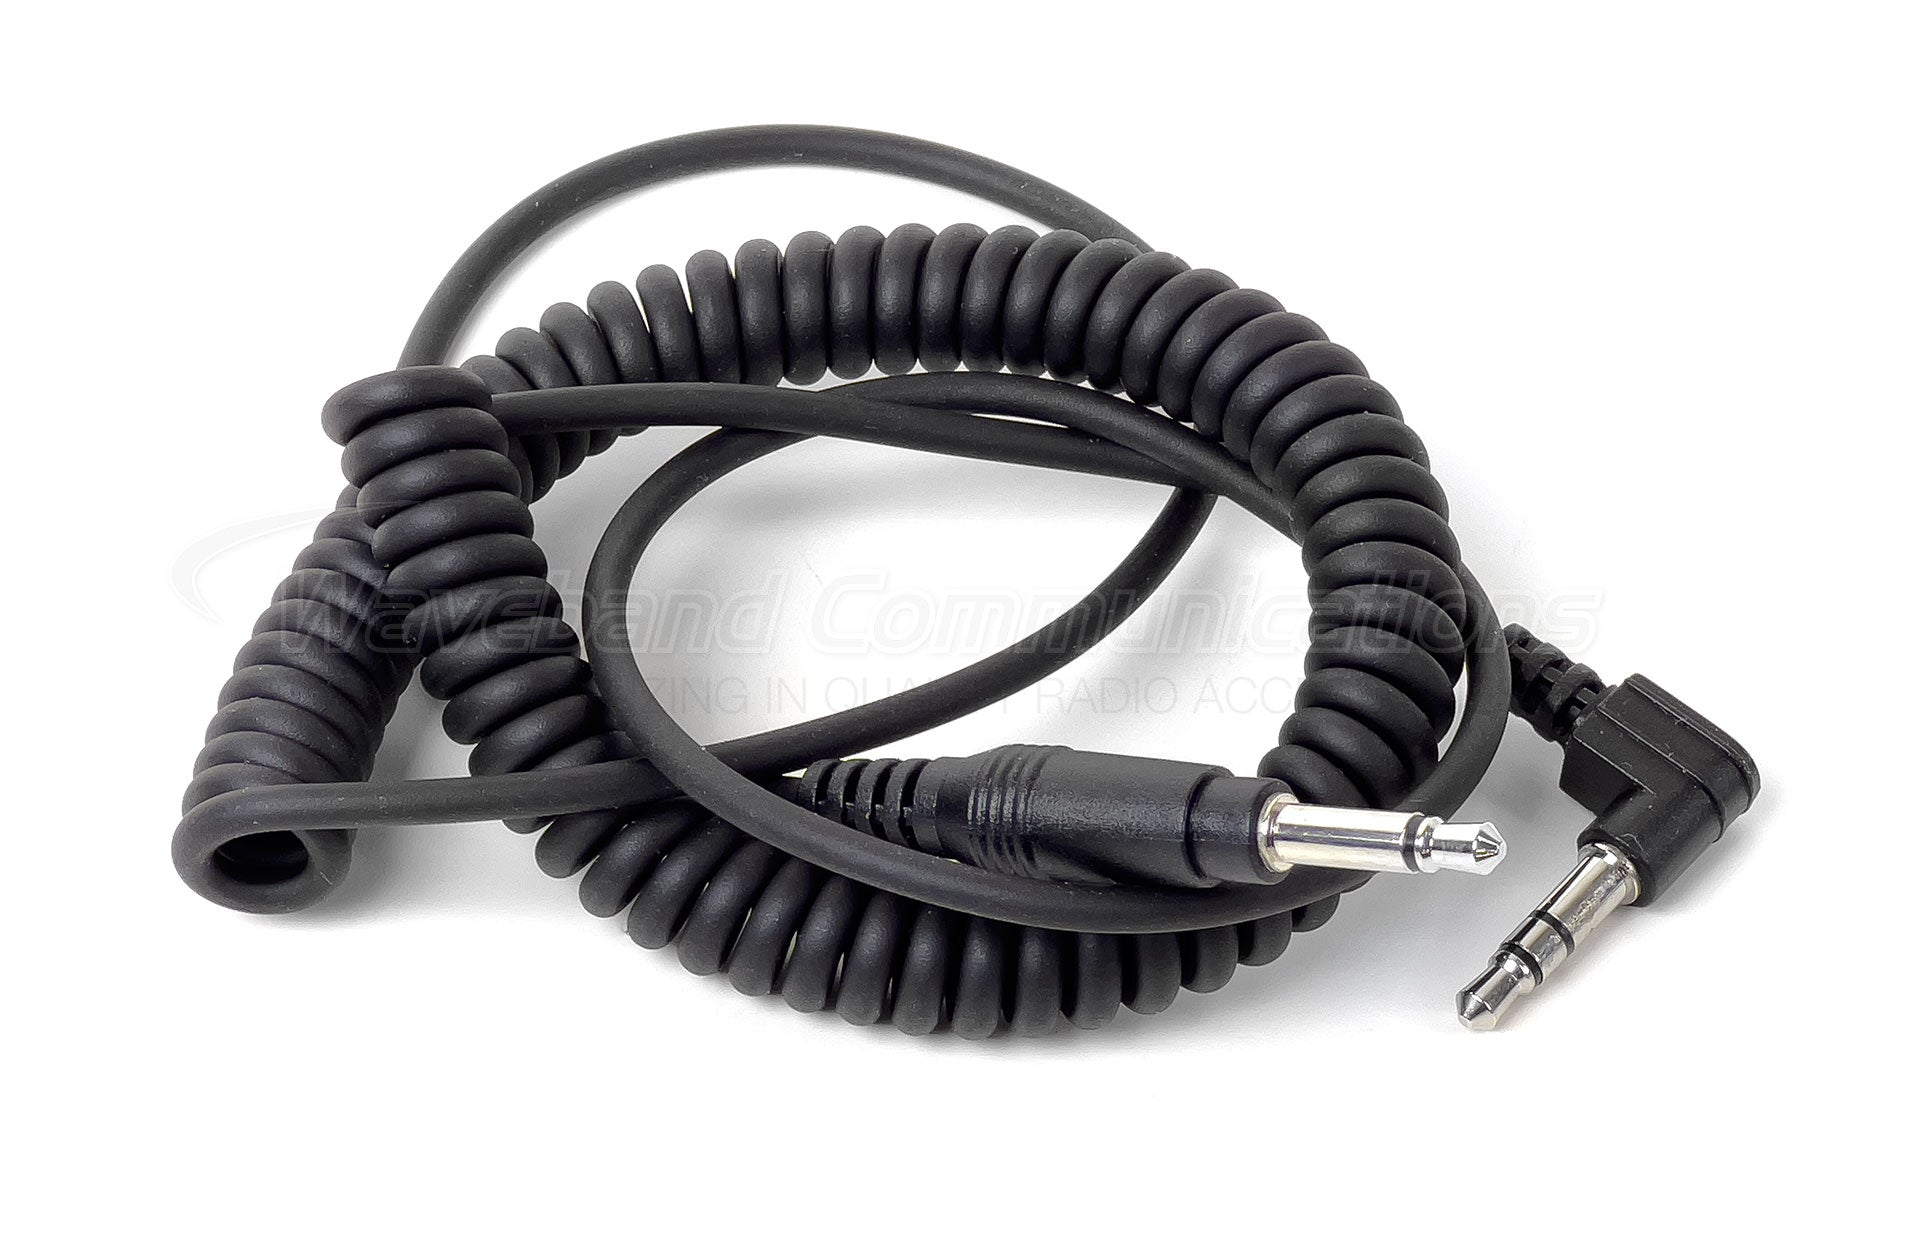 scanner 3.5mm cable